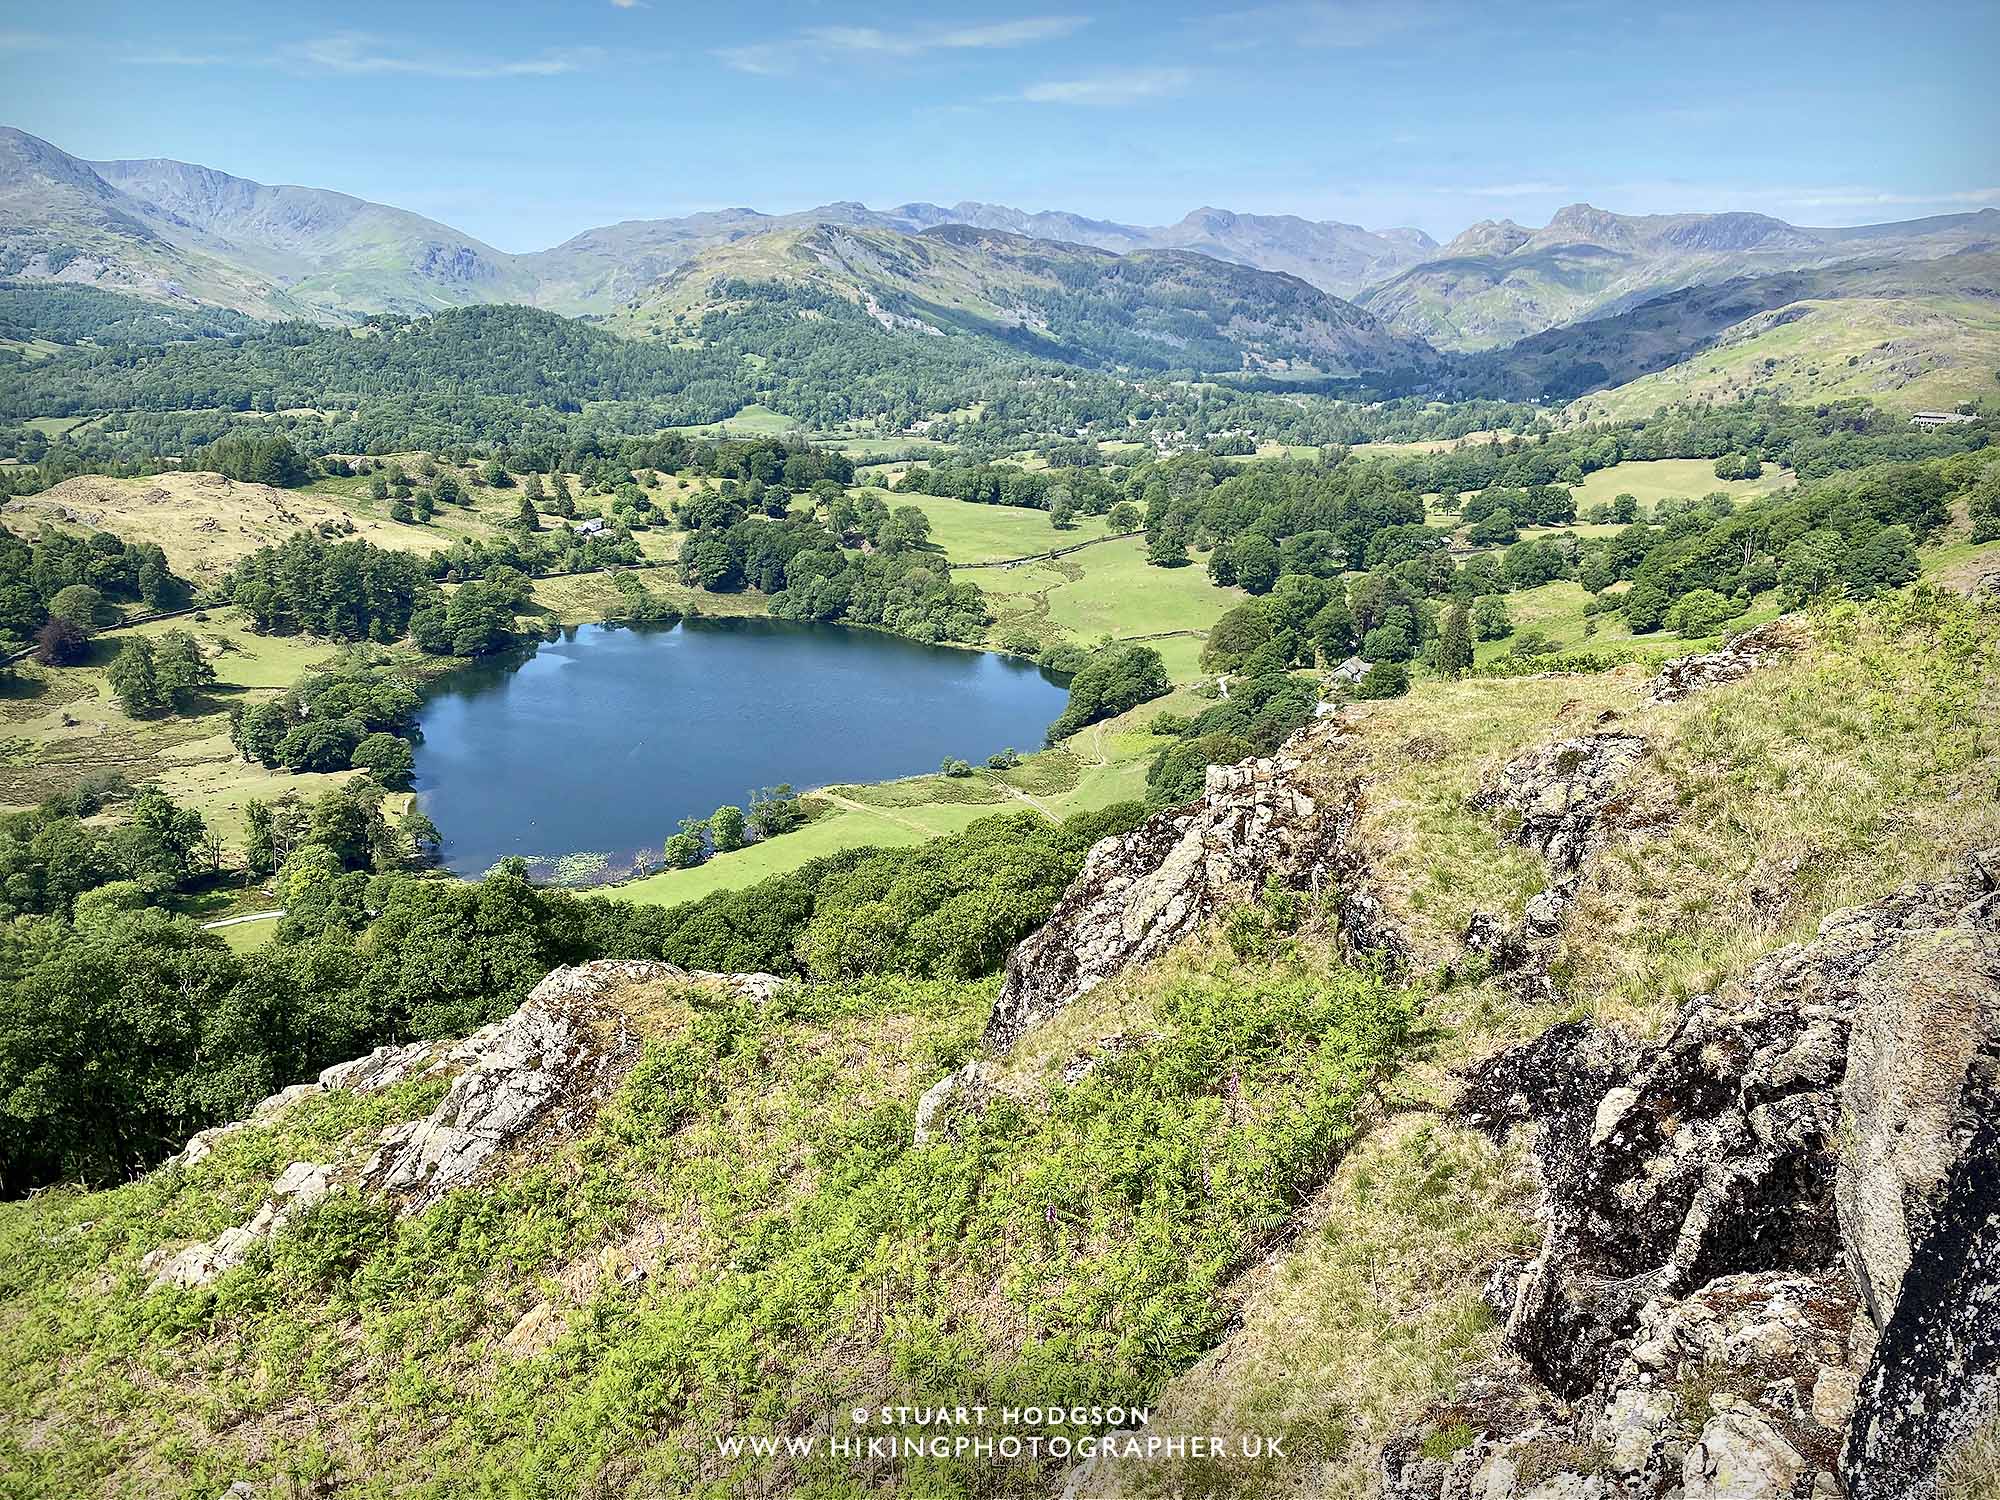 Loughrigg Fell Langdale Windermere Ambleside Walk map route Grasmere Lake District lakes